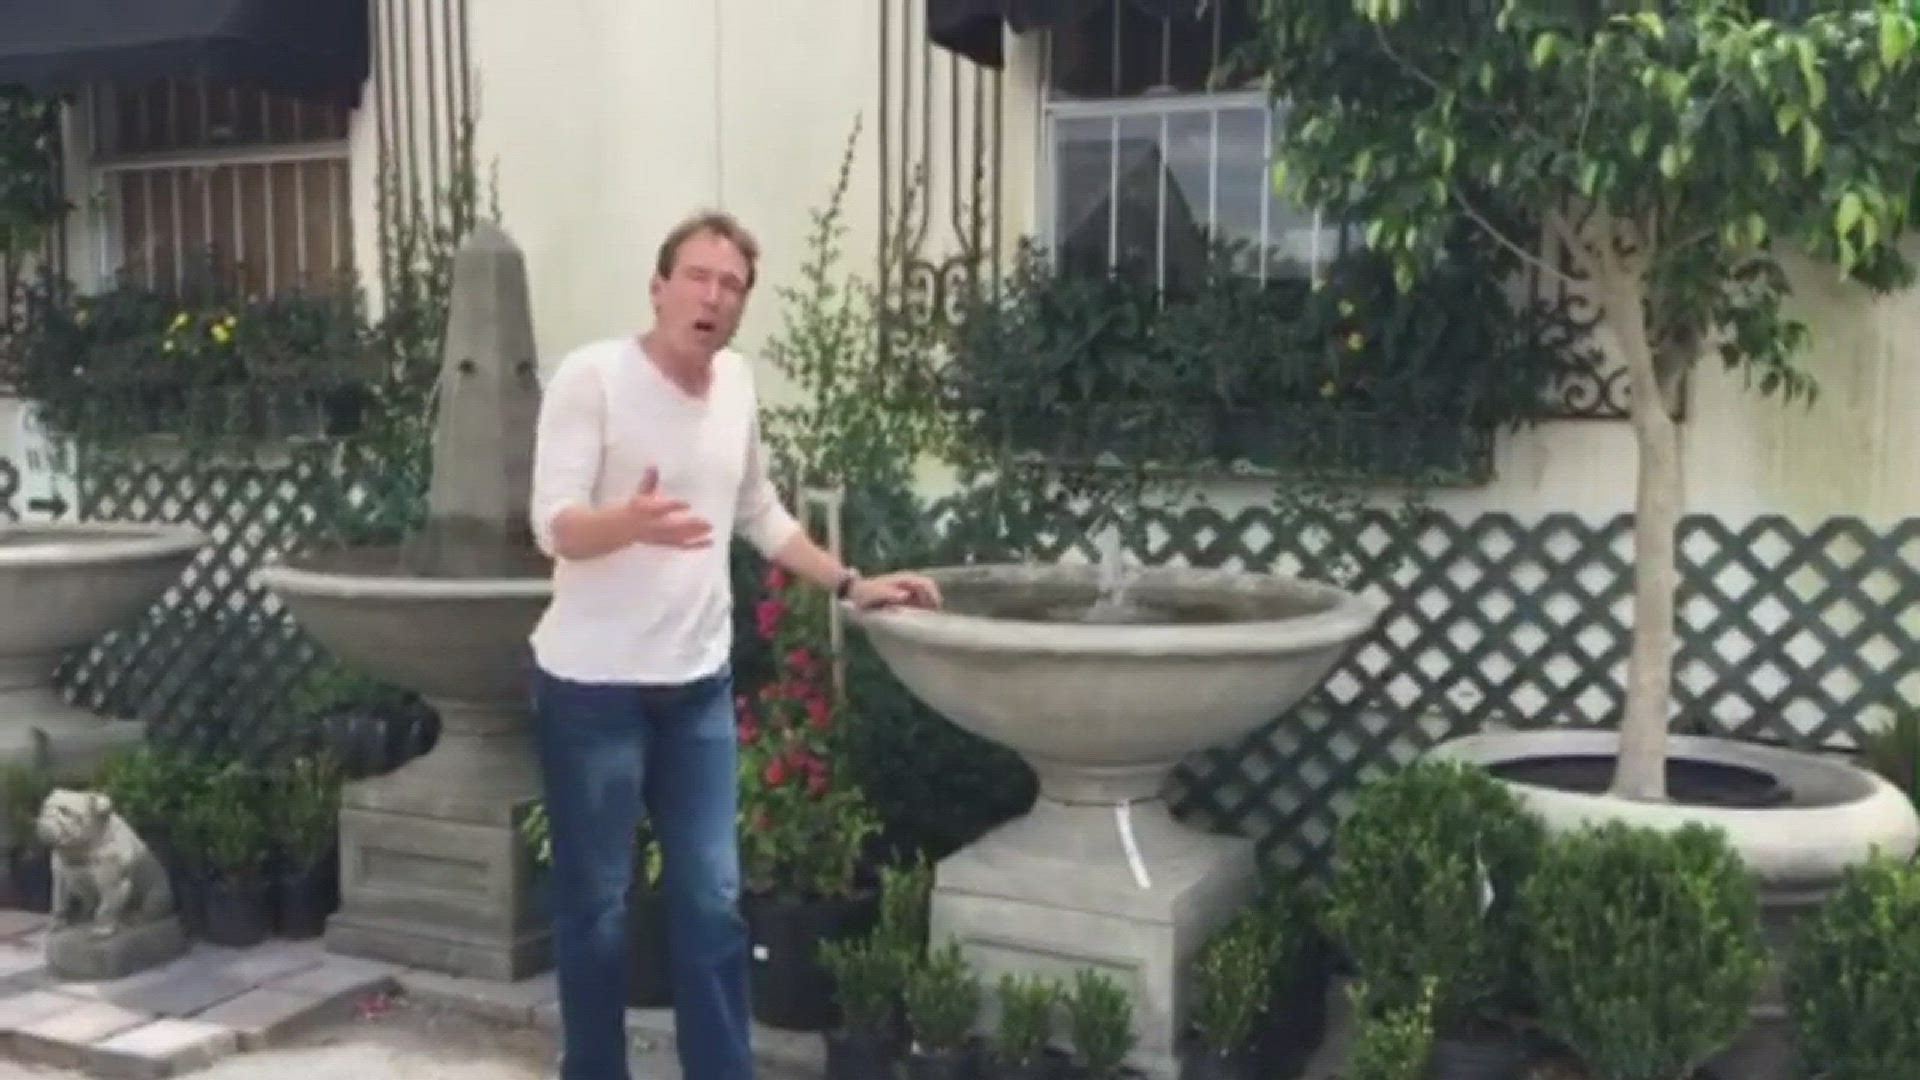 Kenny Rabalais, The Plant Gallery, demonstrates the "Big Bubbler" fountain and the "Copper Pieced" Fountain. The Plant Gallery can suggest the perfect fountain for your garden.